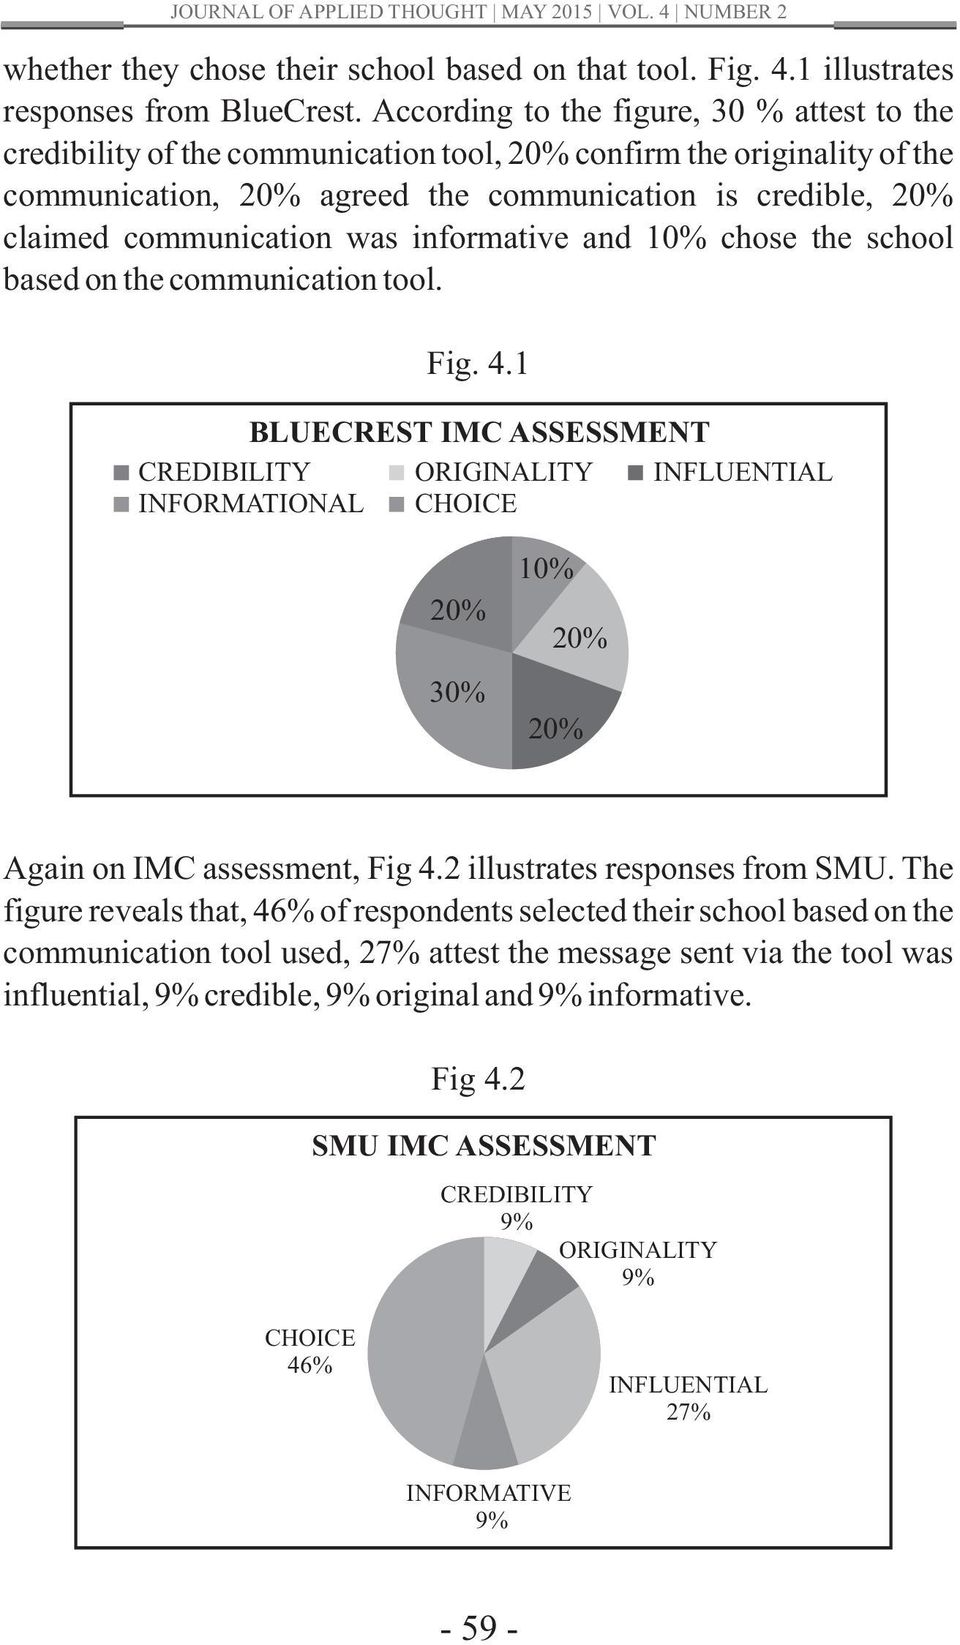 informative and chose the school based on the communication tool. Fig. 4.1 BLUECREST IMC ASSESSMENT CREDIBILITY INFORMATIONAL ORIGINALITY CHOICE INFLUENTIAL 30% Again on IMC assessment, Fig 4.